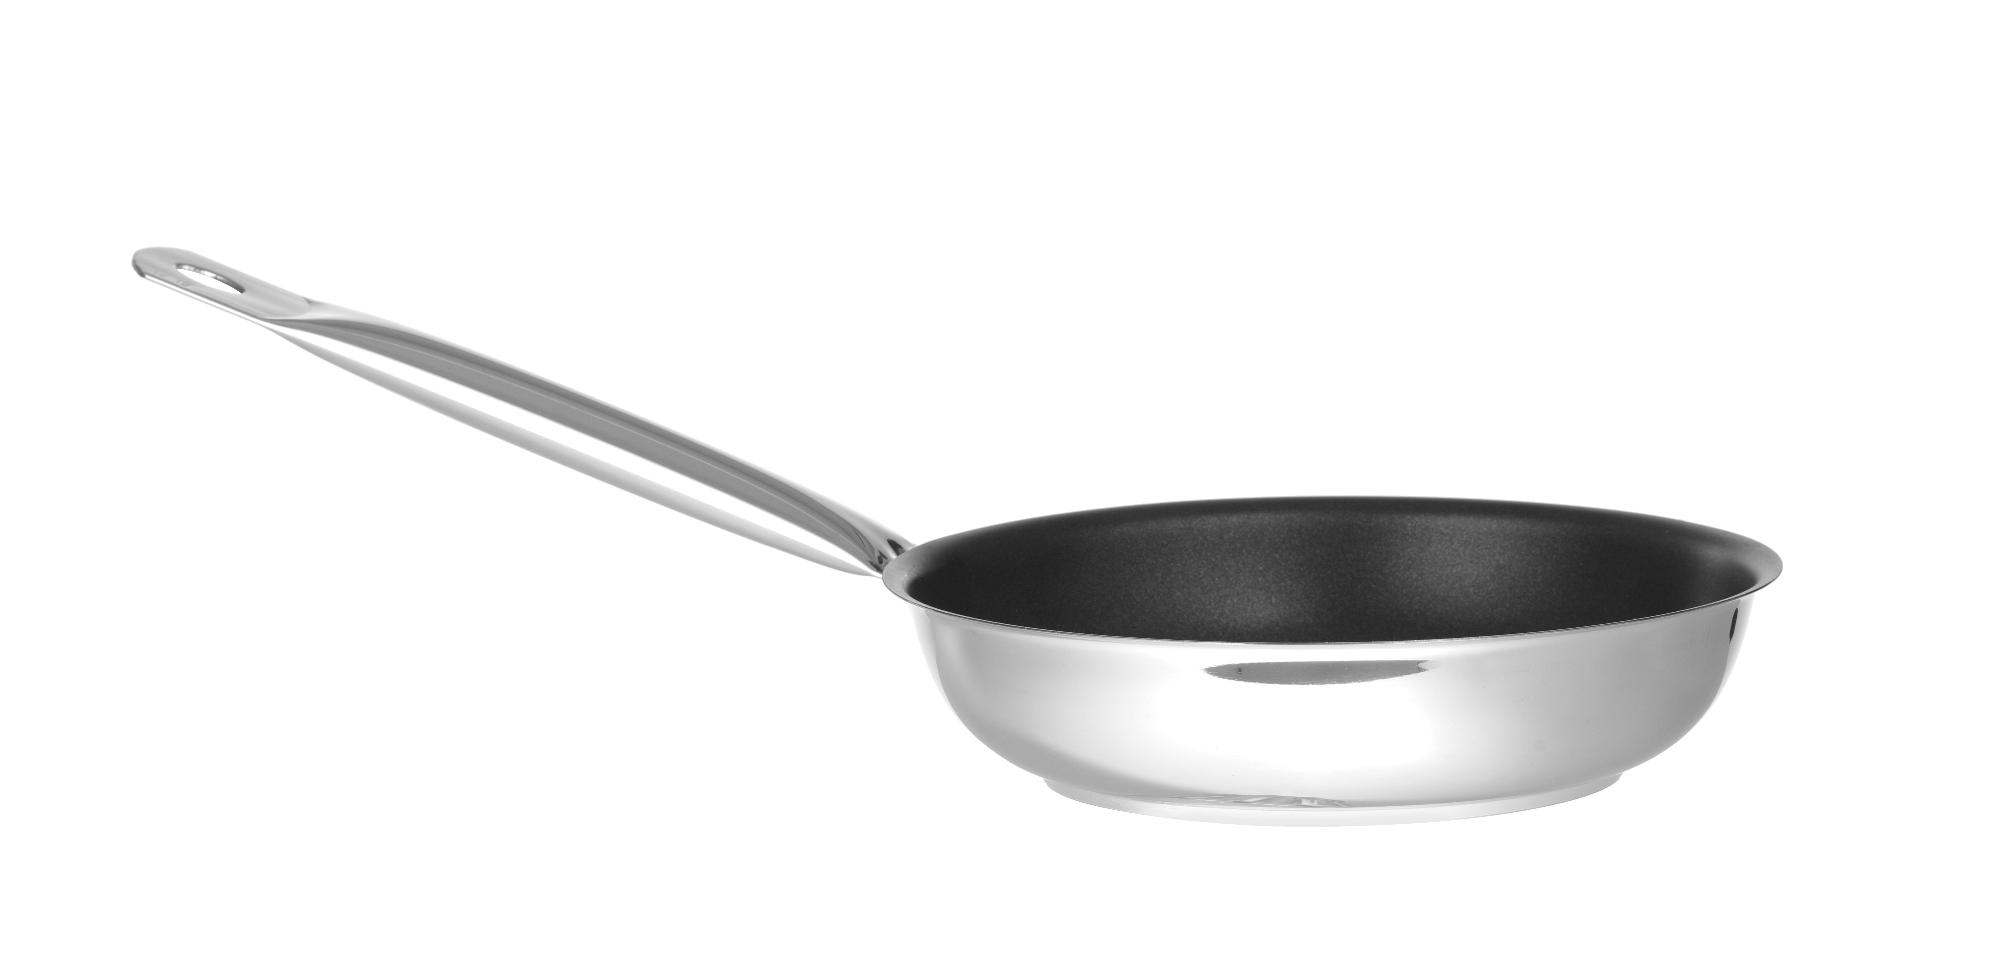 Non-stick coated frying pan, 360mm